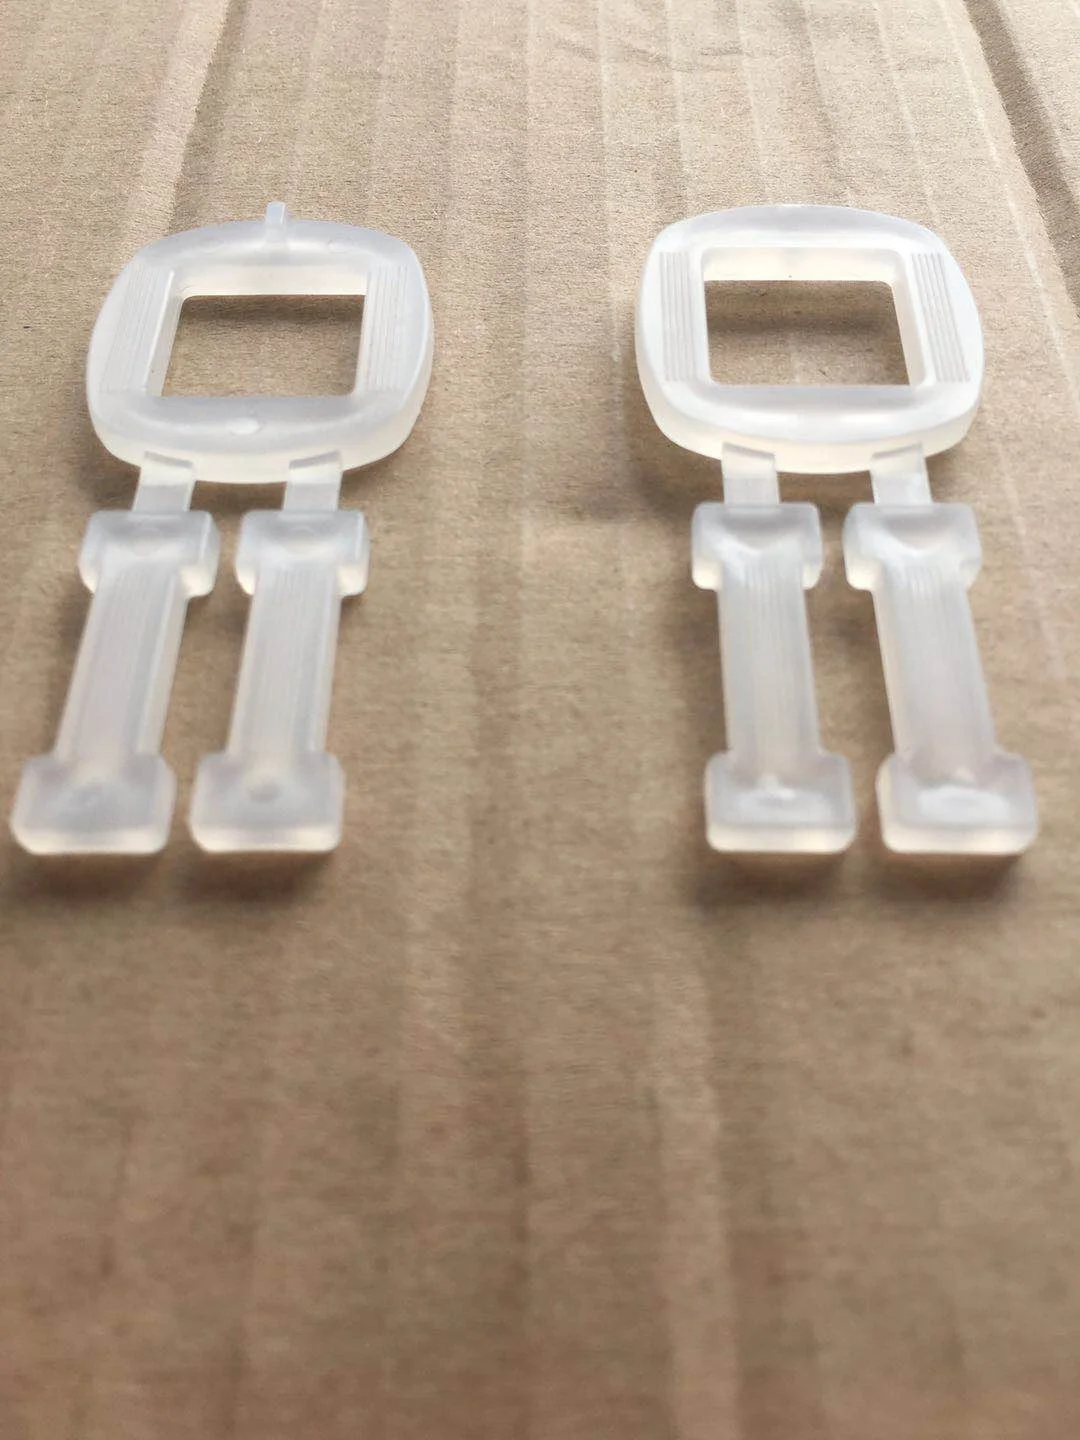 PP Strapping Plastic Buckle 15mm - Packaging Supplier Singapore